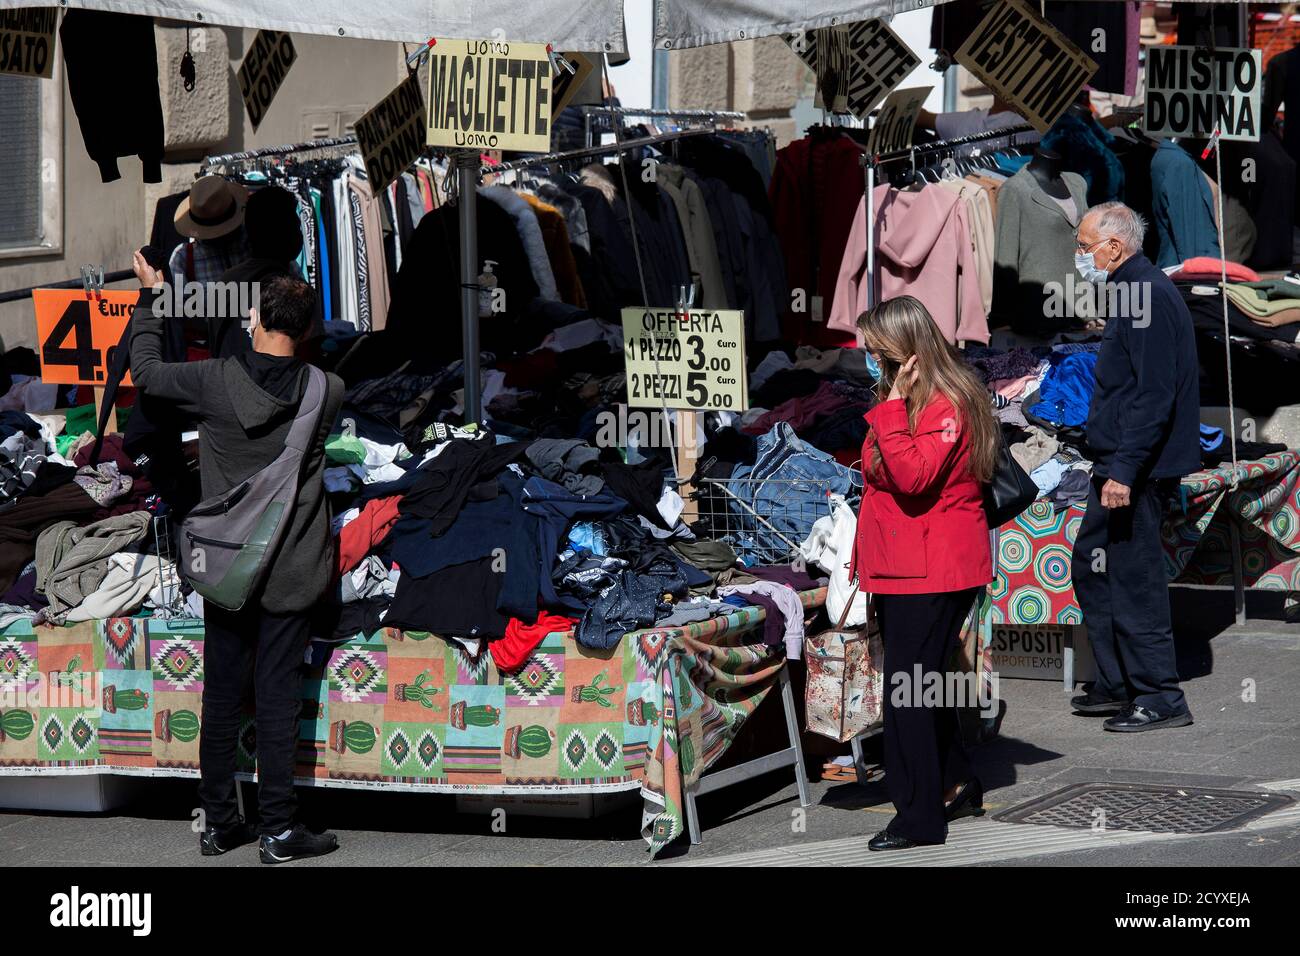 ROME, ITALY - OCTOBER 01 2020: Pedestrians browses for clothes on sale at a market stall in Rome, Italy. Stock Photo